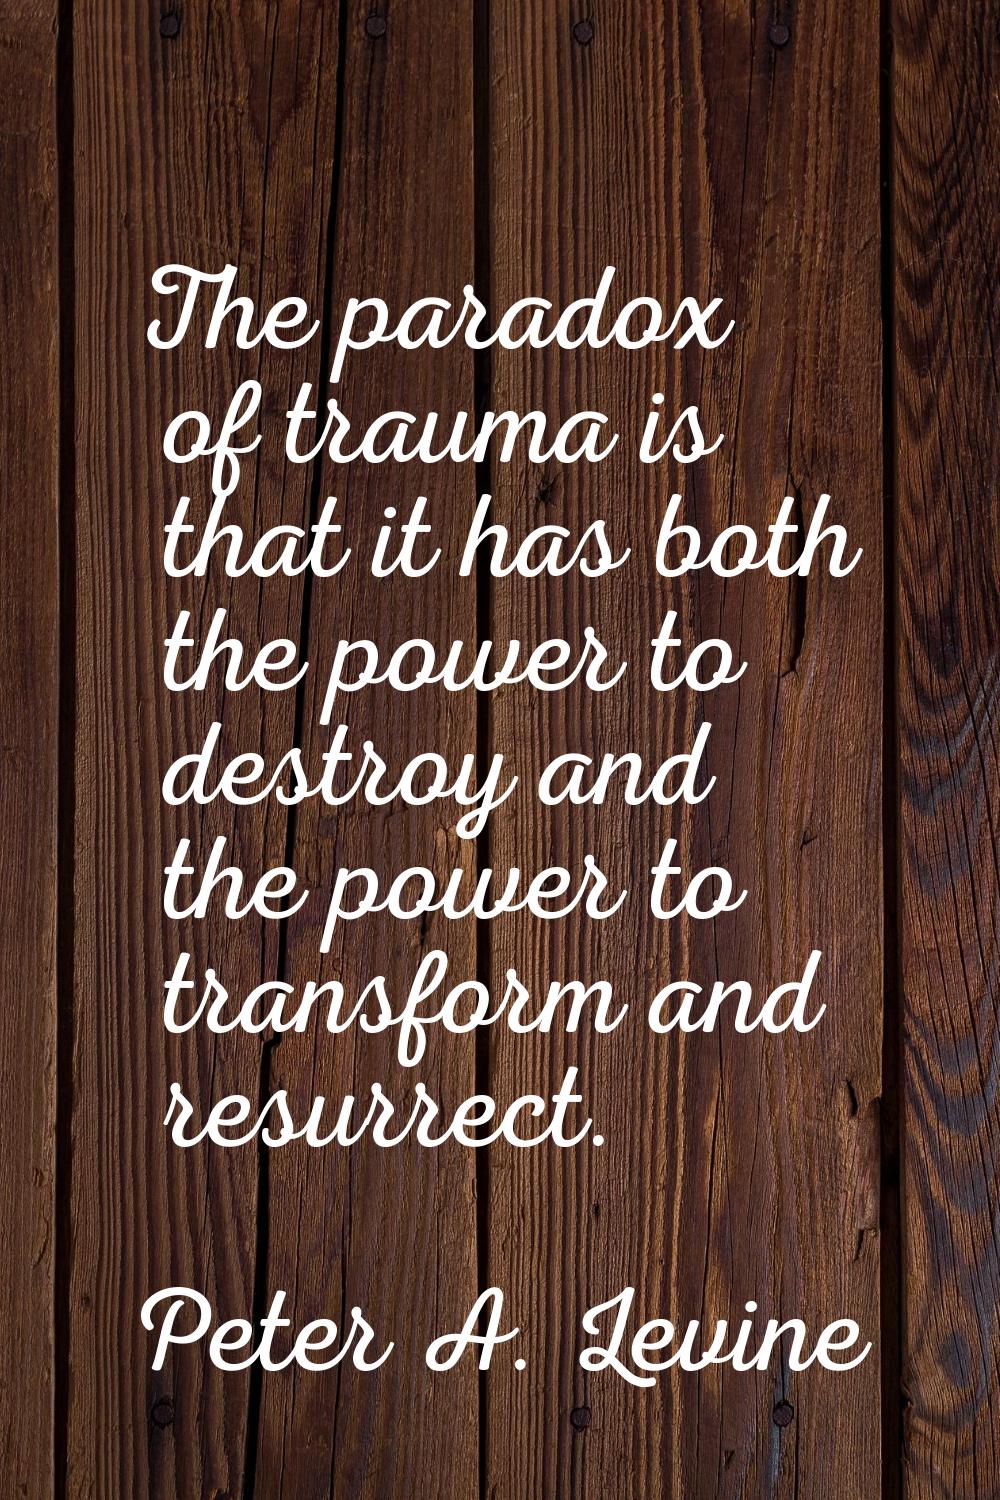 The paradox of trauma is that it has both the power to destroy and the power to transform and resur